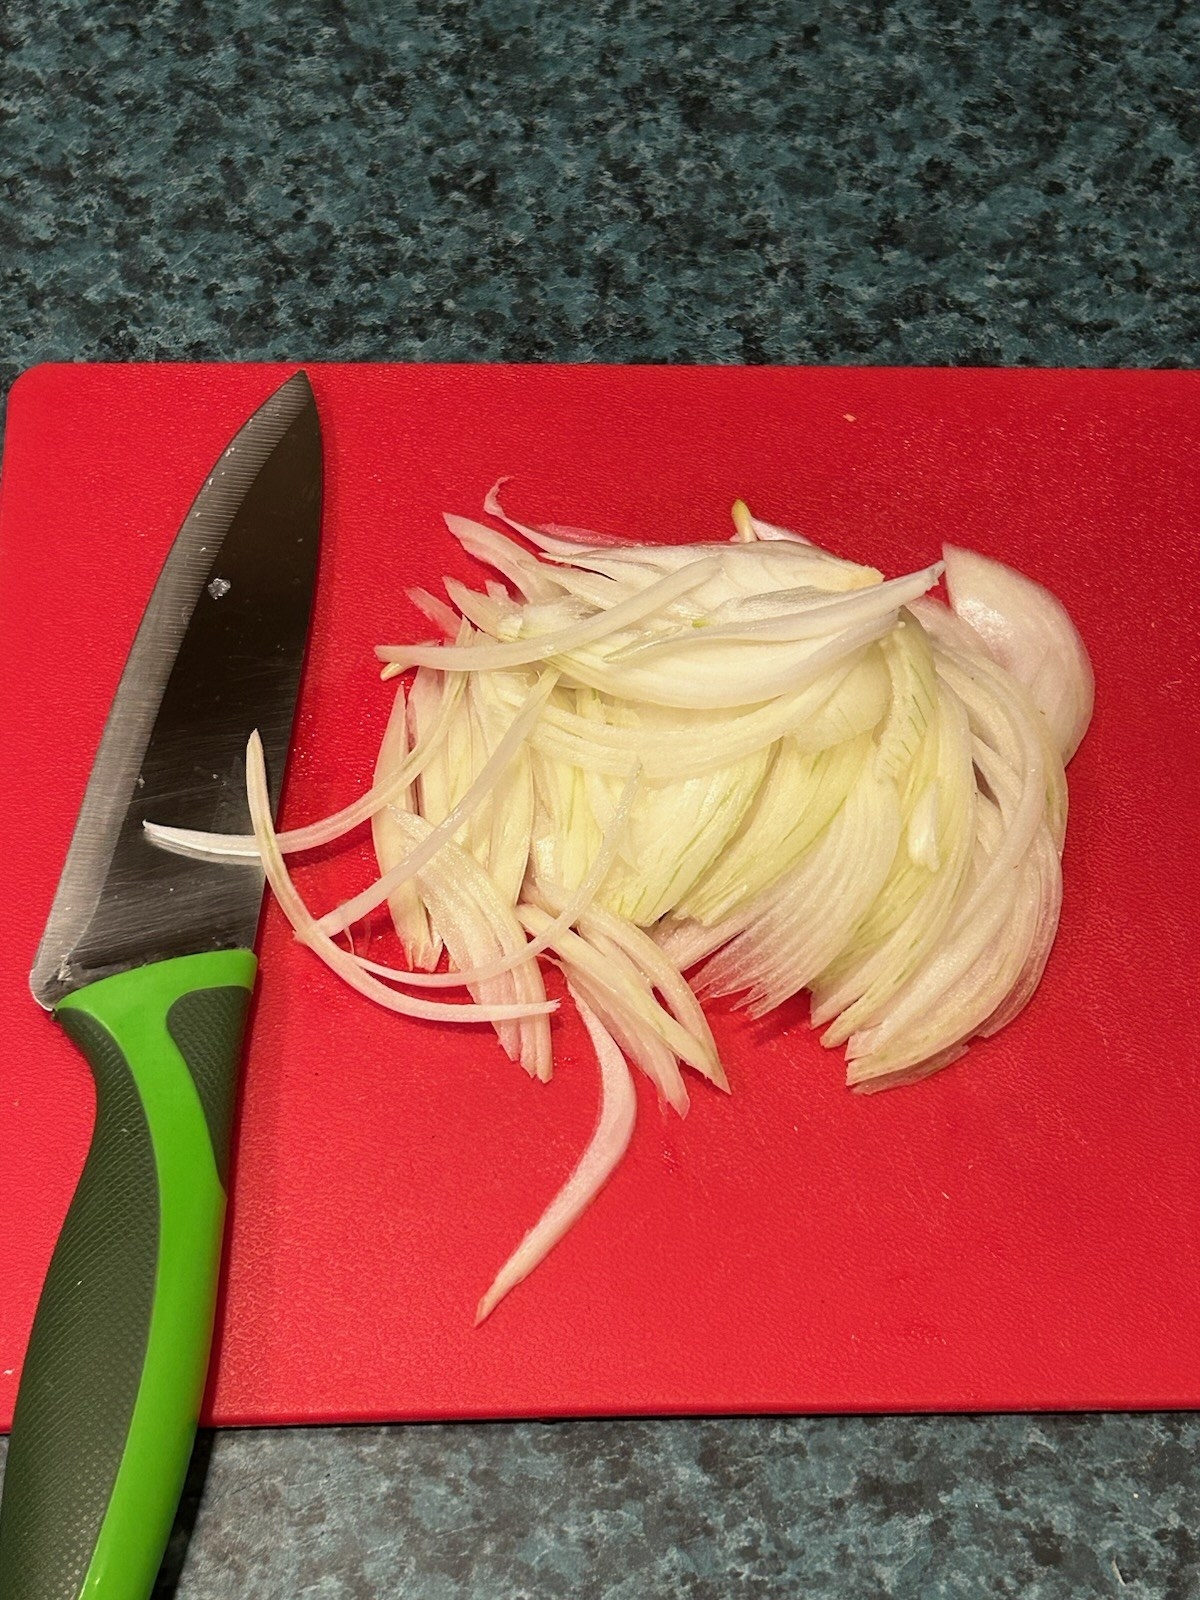 A cutting board with sliced onions next to a knife